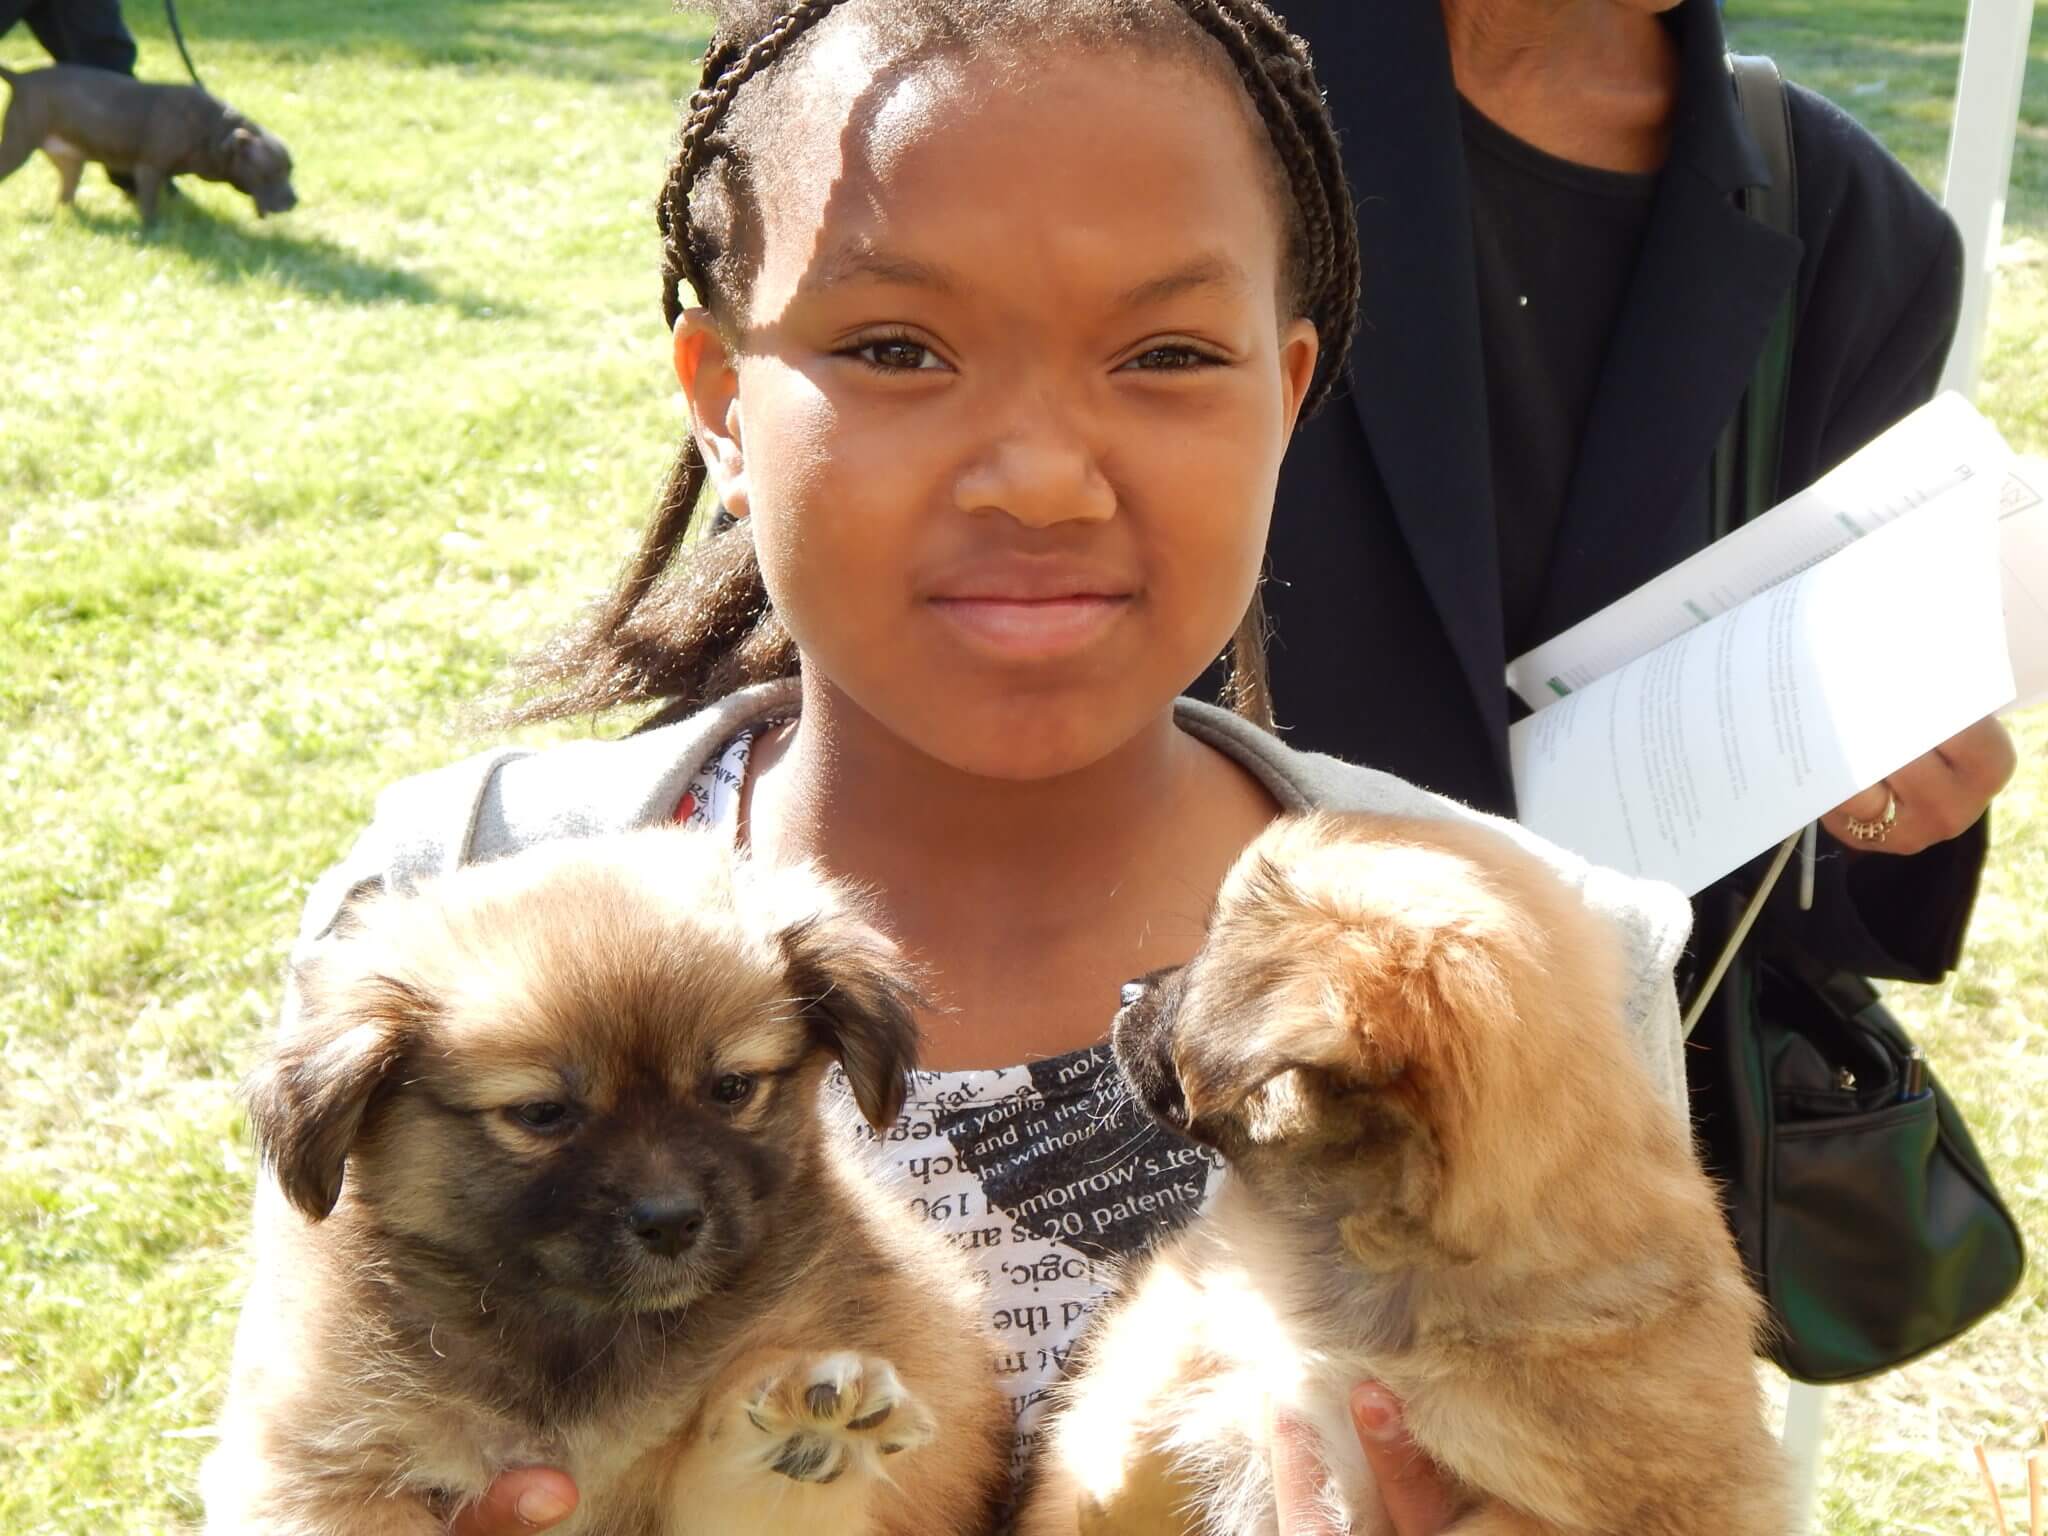 Protect-A-Pet vaccine clinics are one of the ways we reach out to the community to help keep families together. 